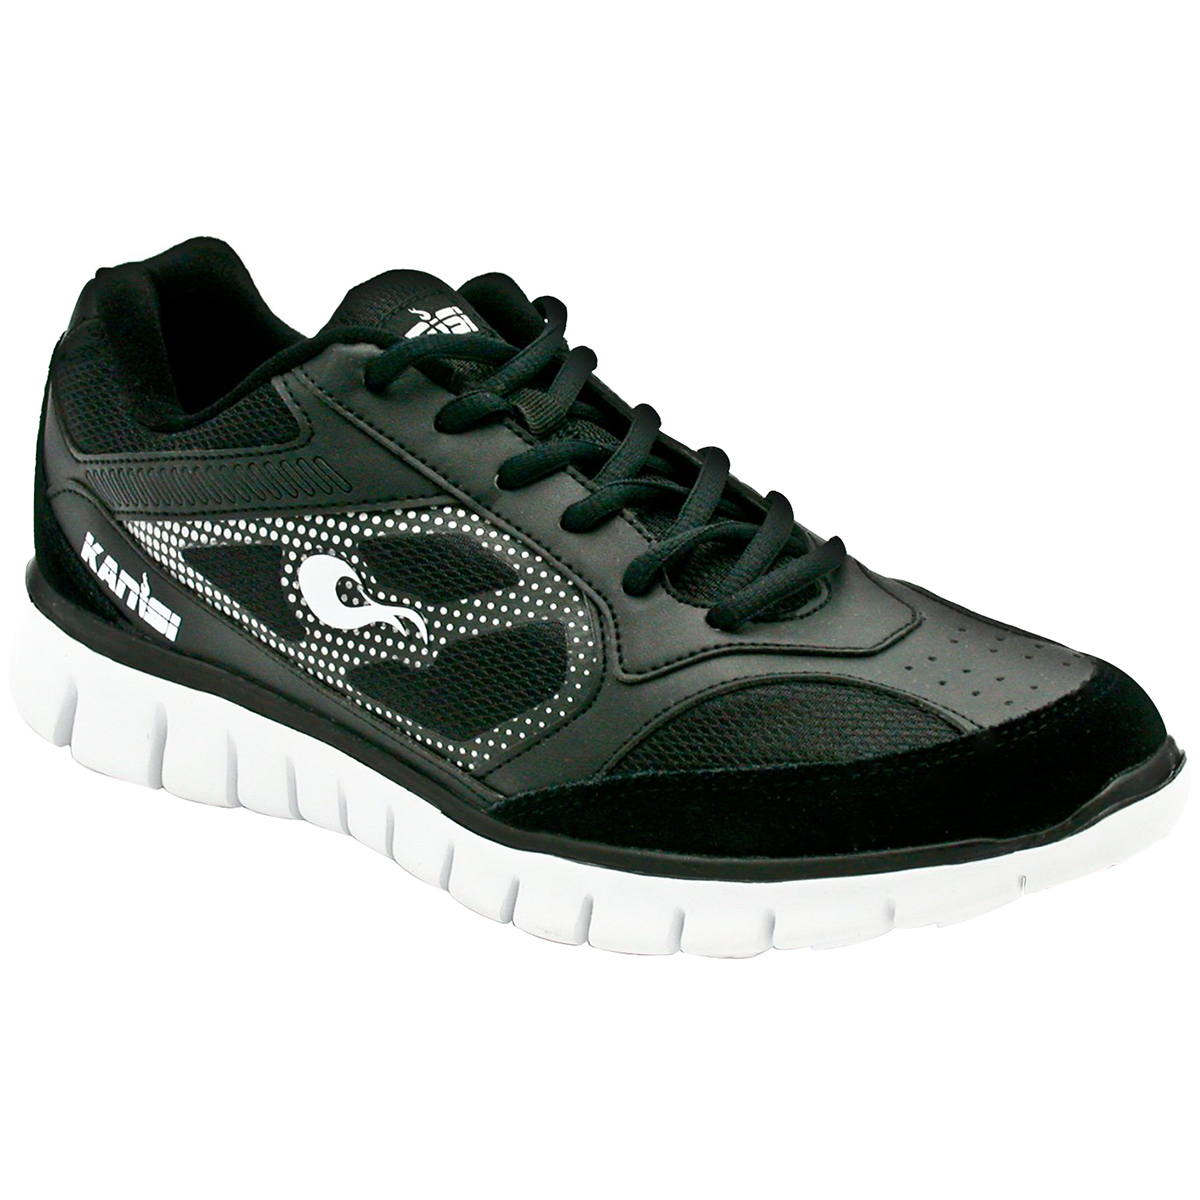 Kanisi Boxing Trainer and Running Shoes - 11 - Black/White - image 3 of 4